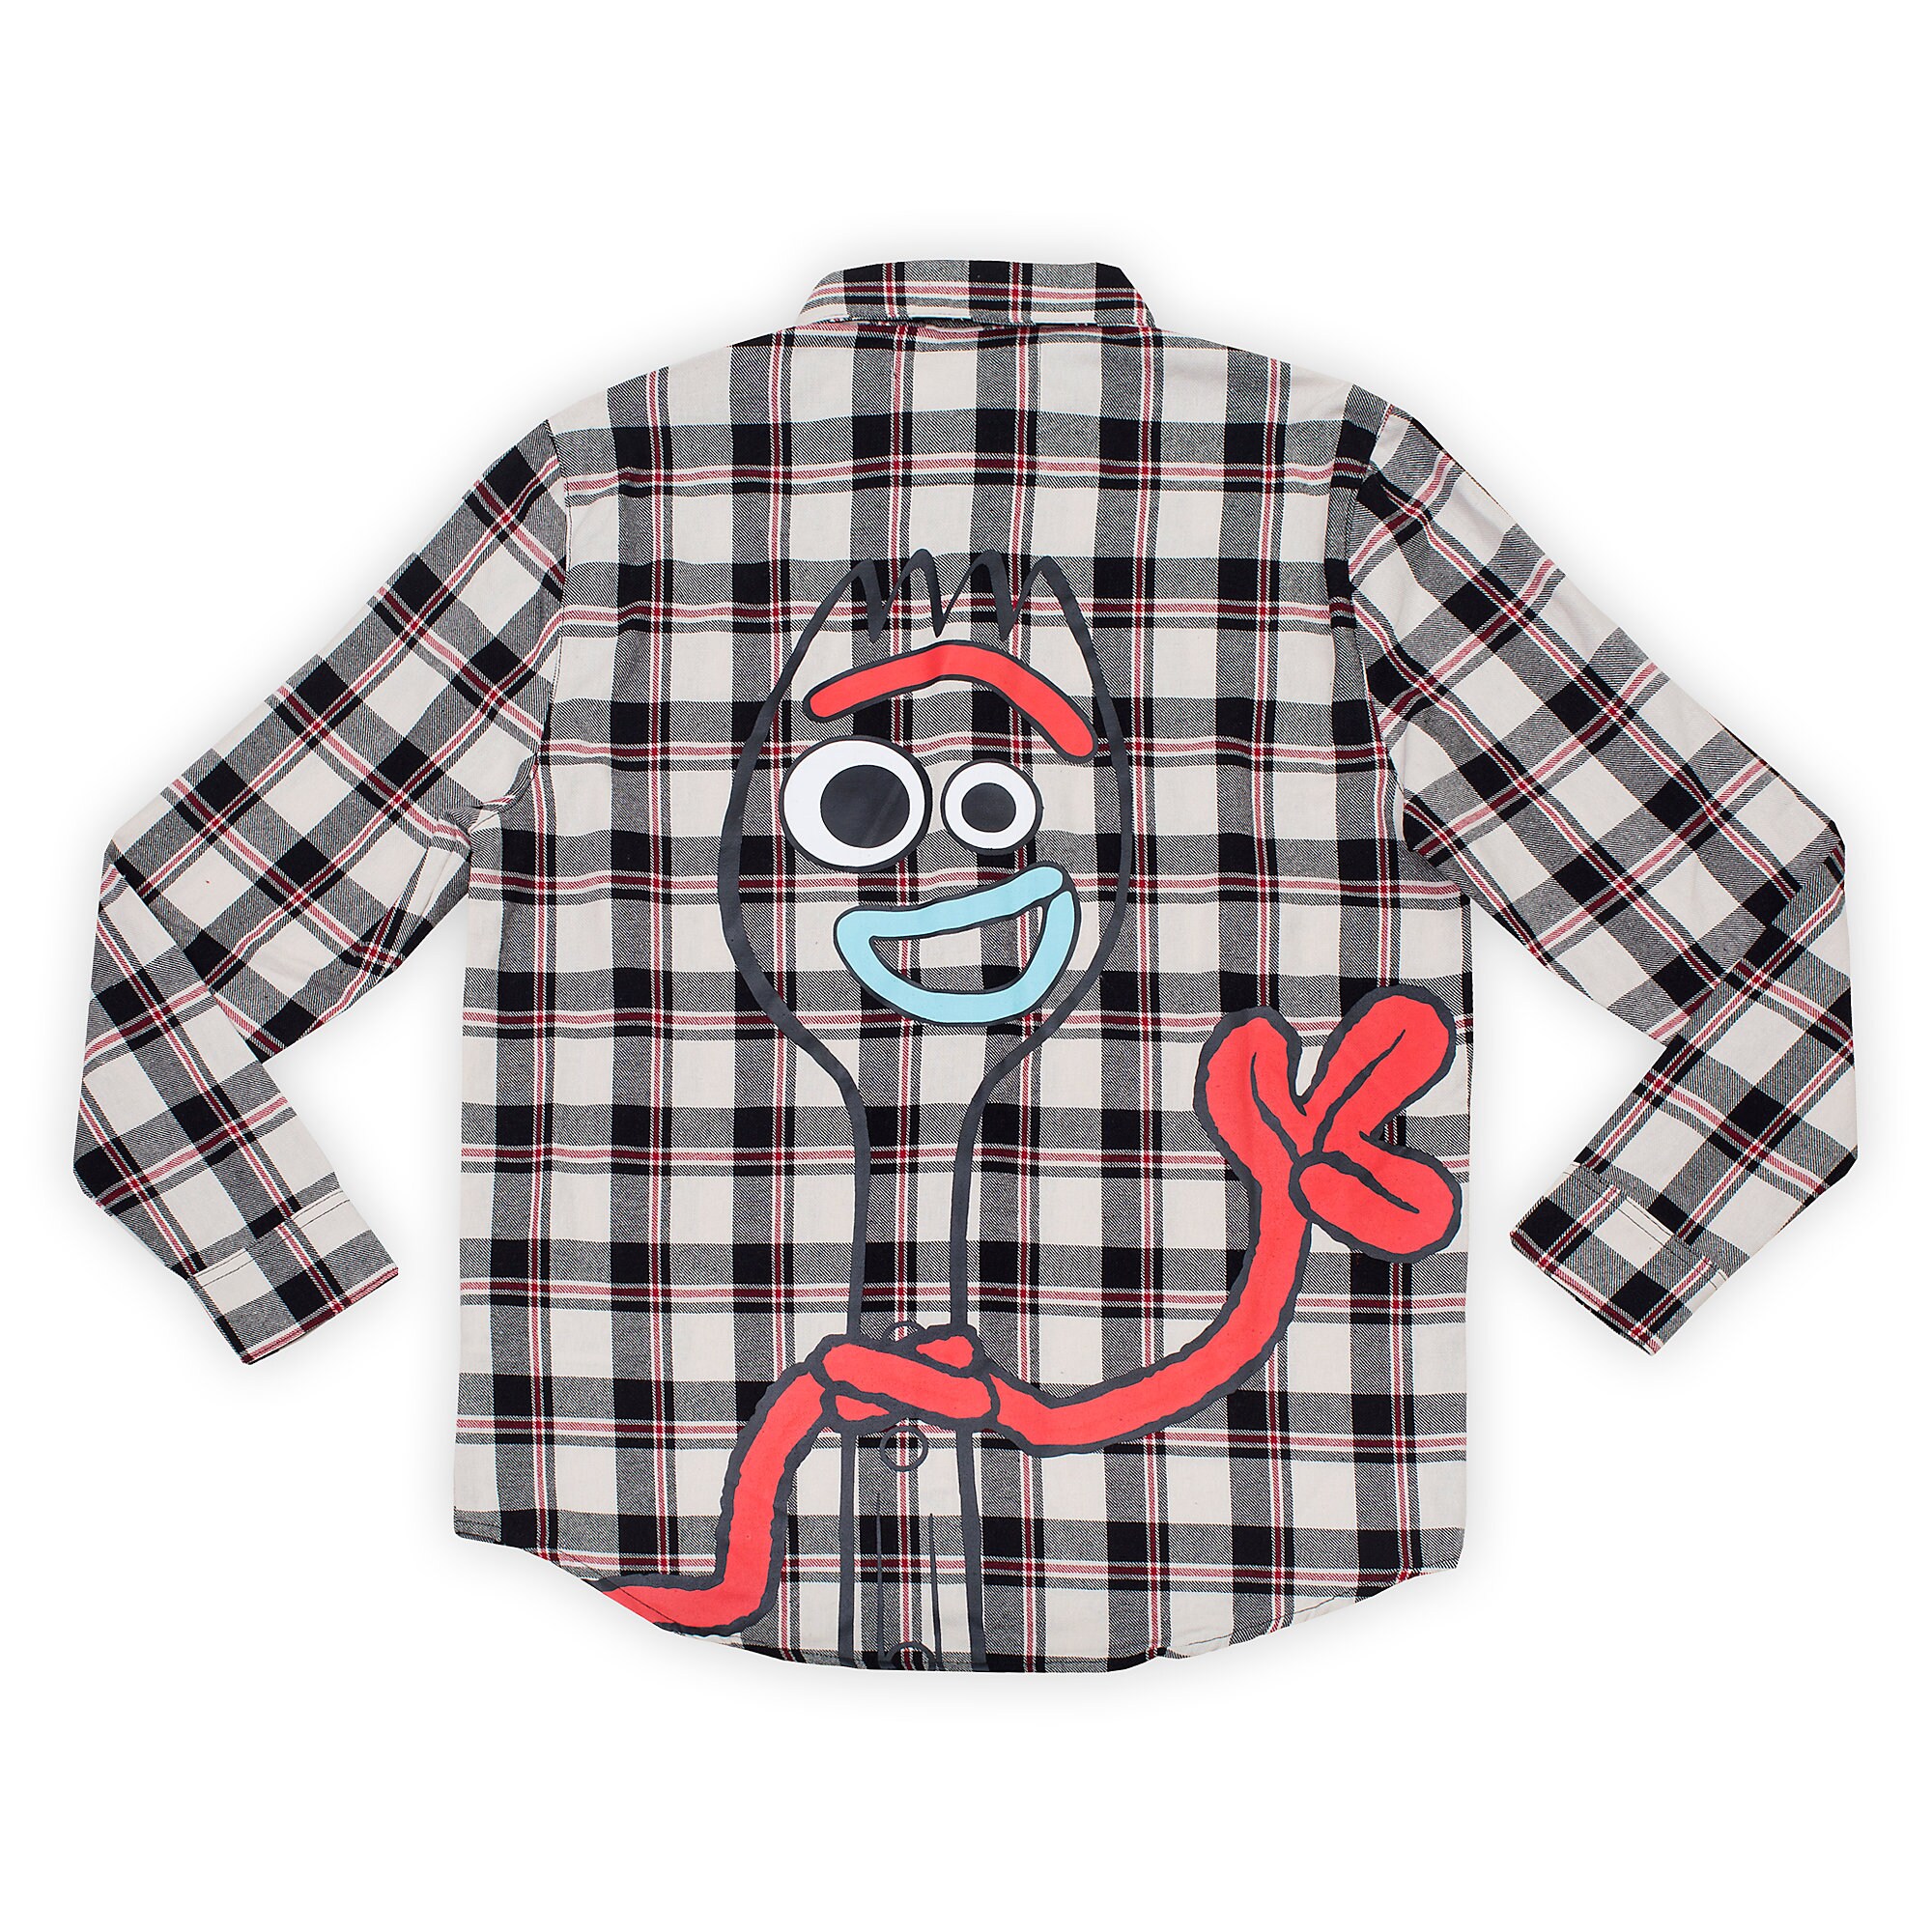 Forky Flannel Shirt for Adults by Cakeworthy - Toy Story 4